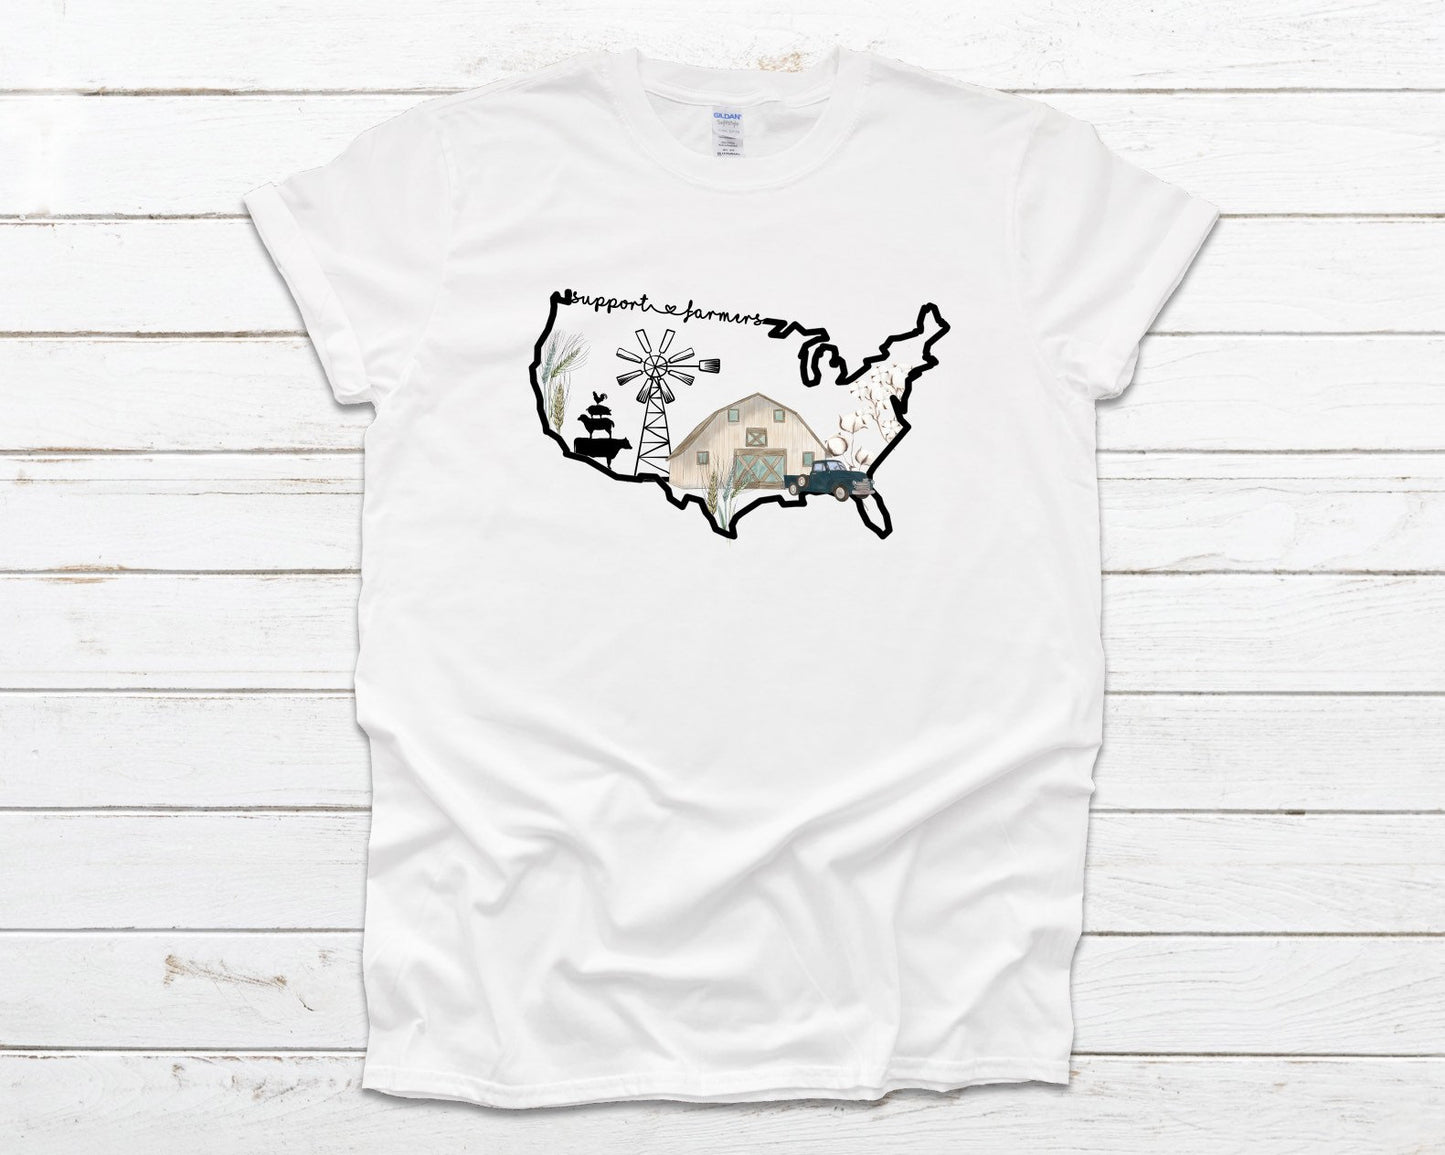 Support farmers tee